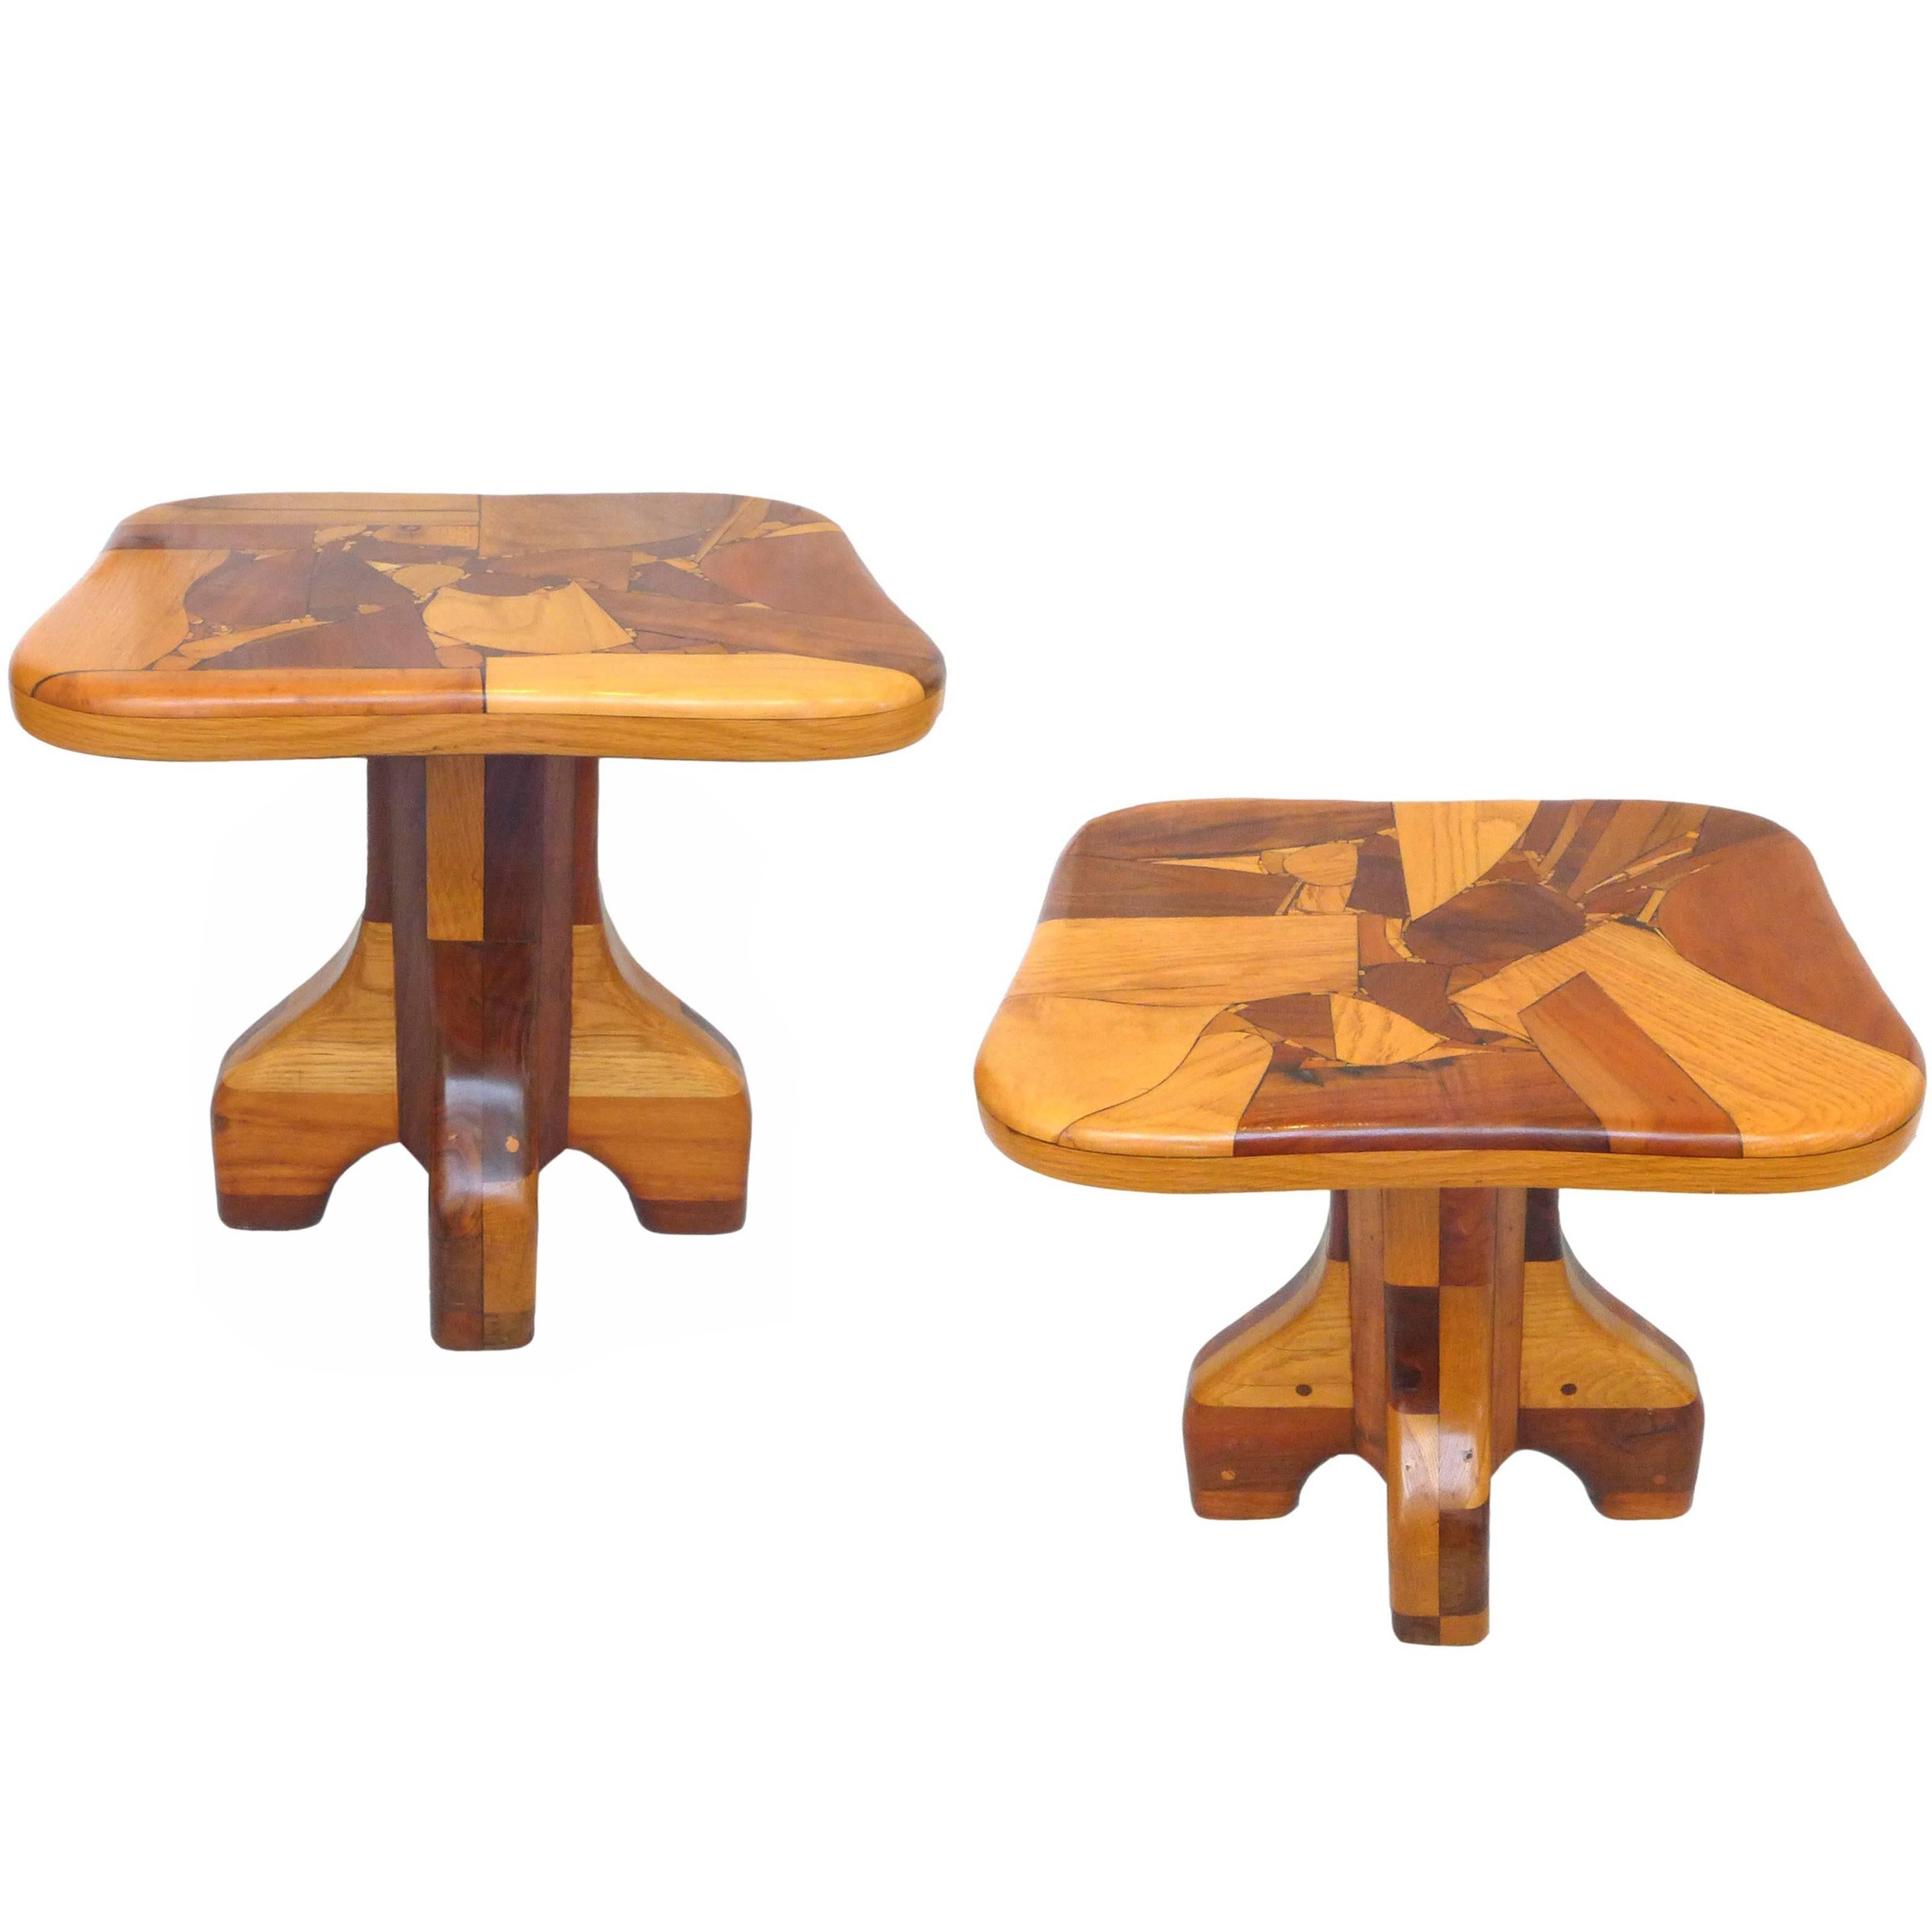 Pair of Handcrafted Wood Marquetry Side Tables